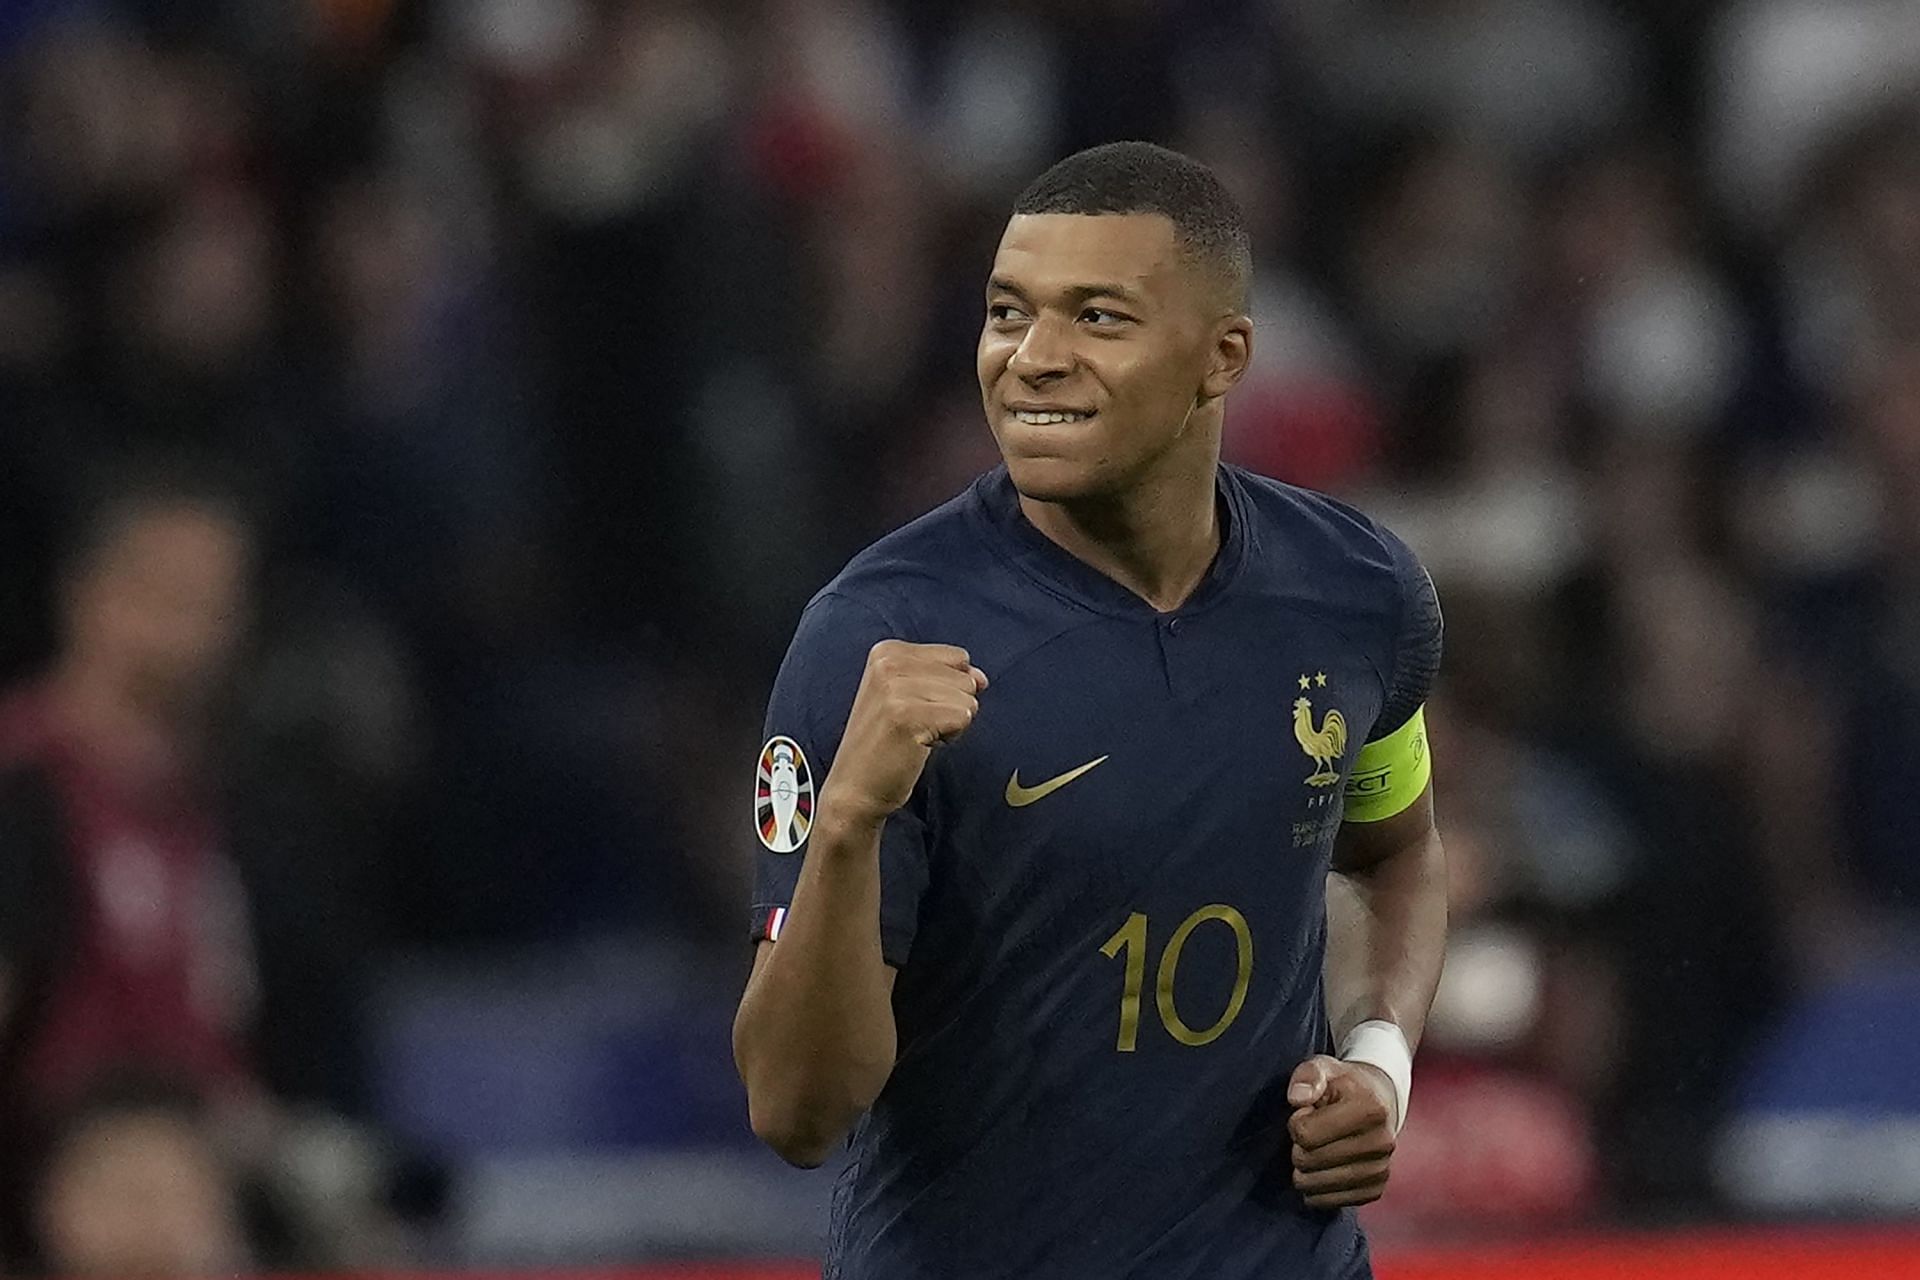 Kylian Mbappe is likely to leave the Parc des Princes soon.